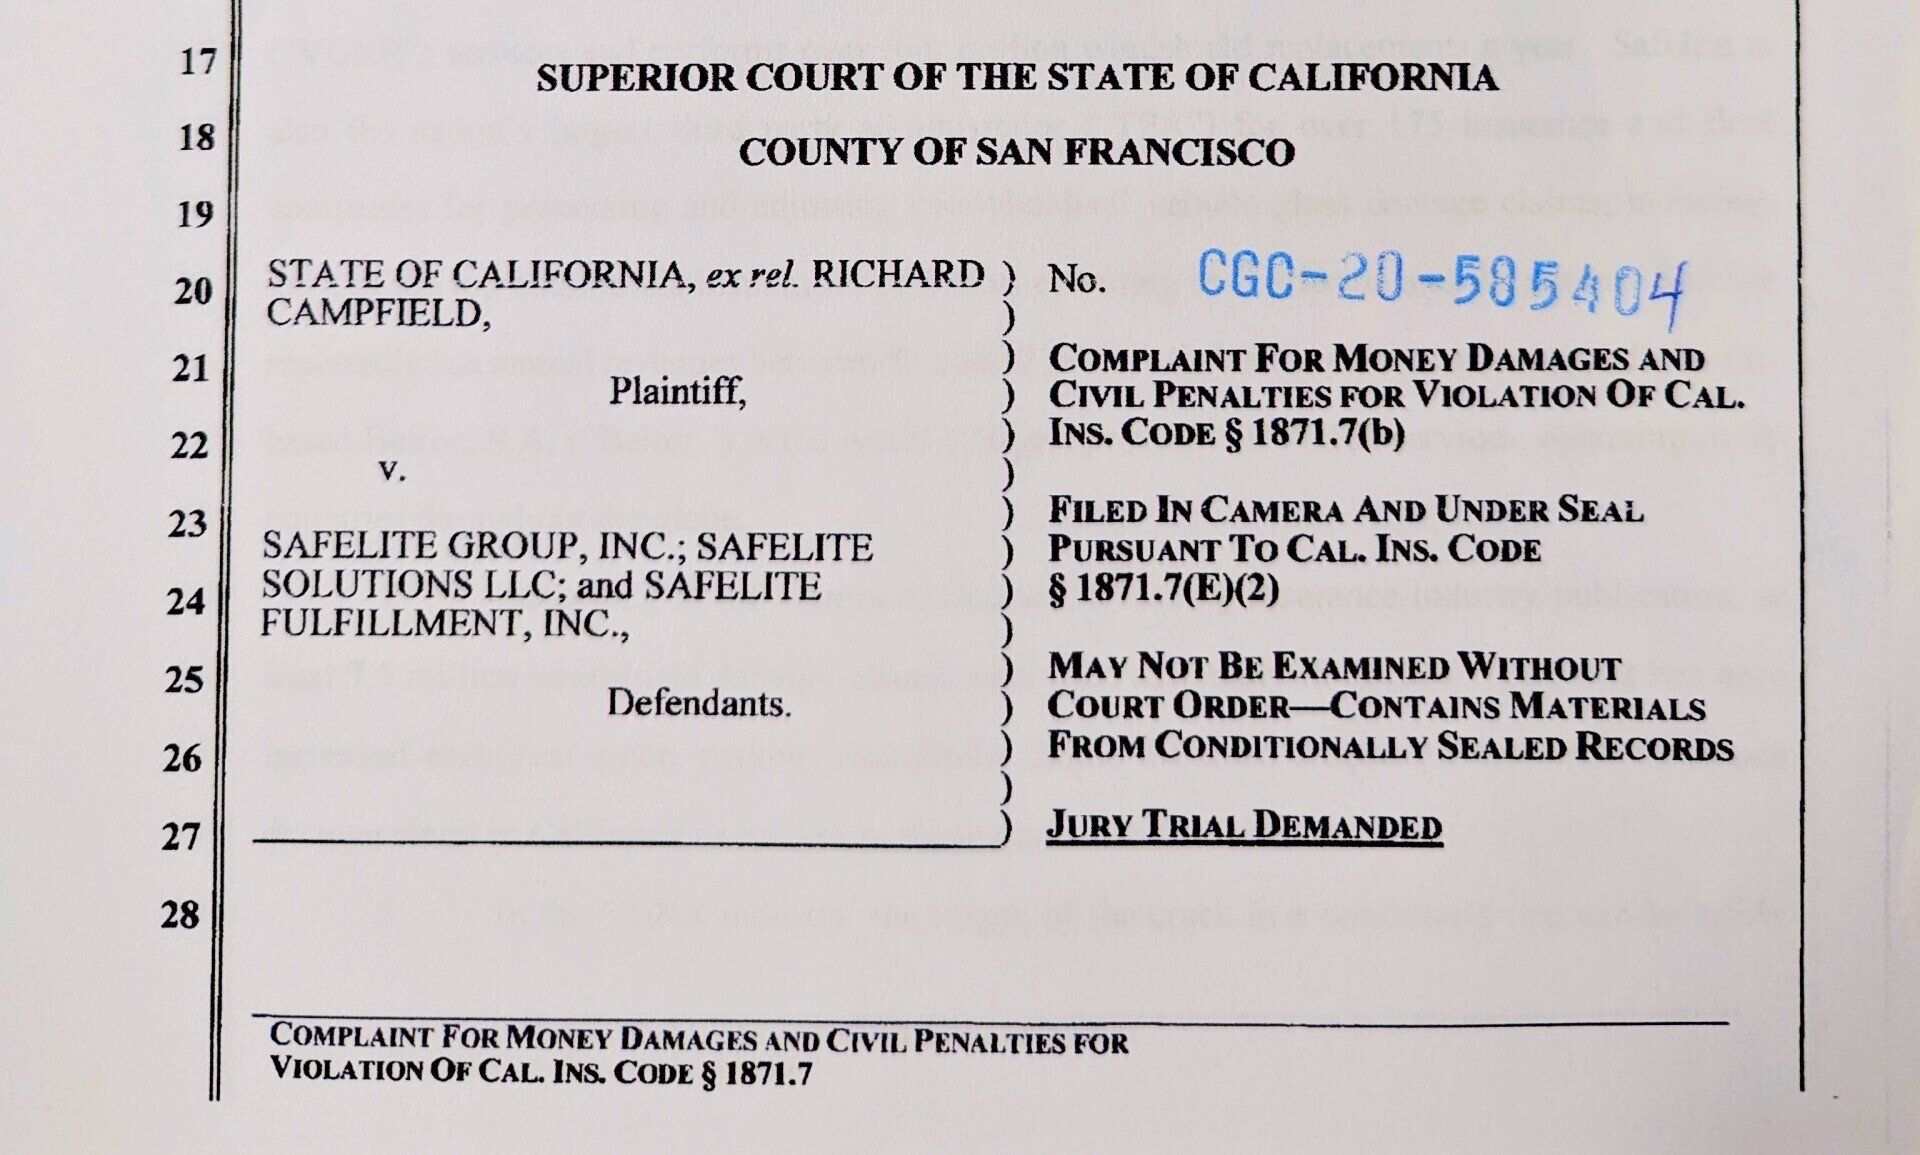 Safelite sued for insurance fraud by California and Richard Campfield